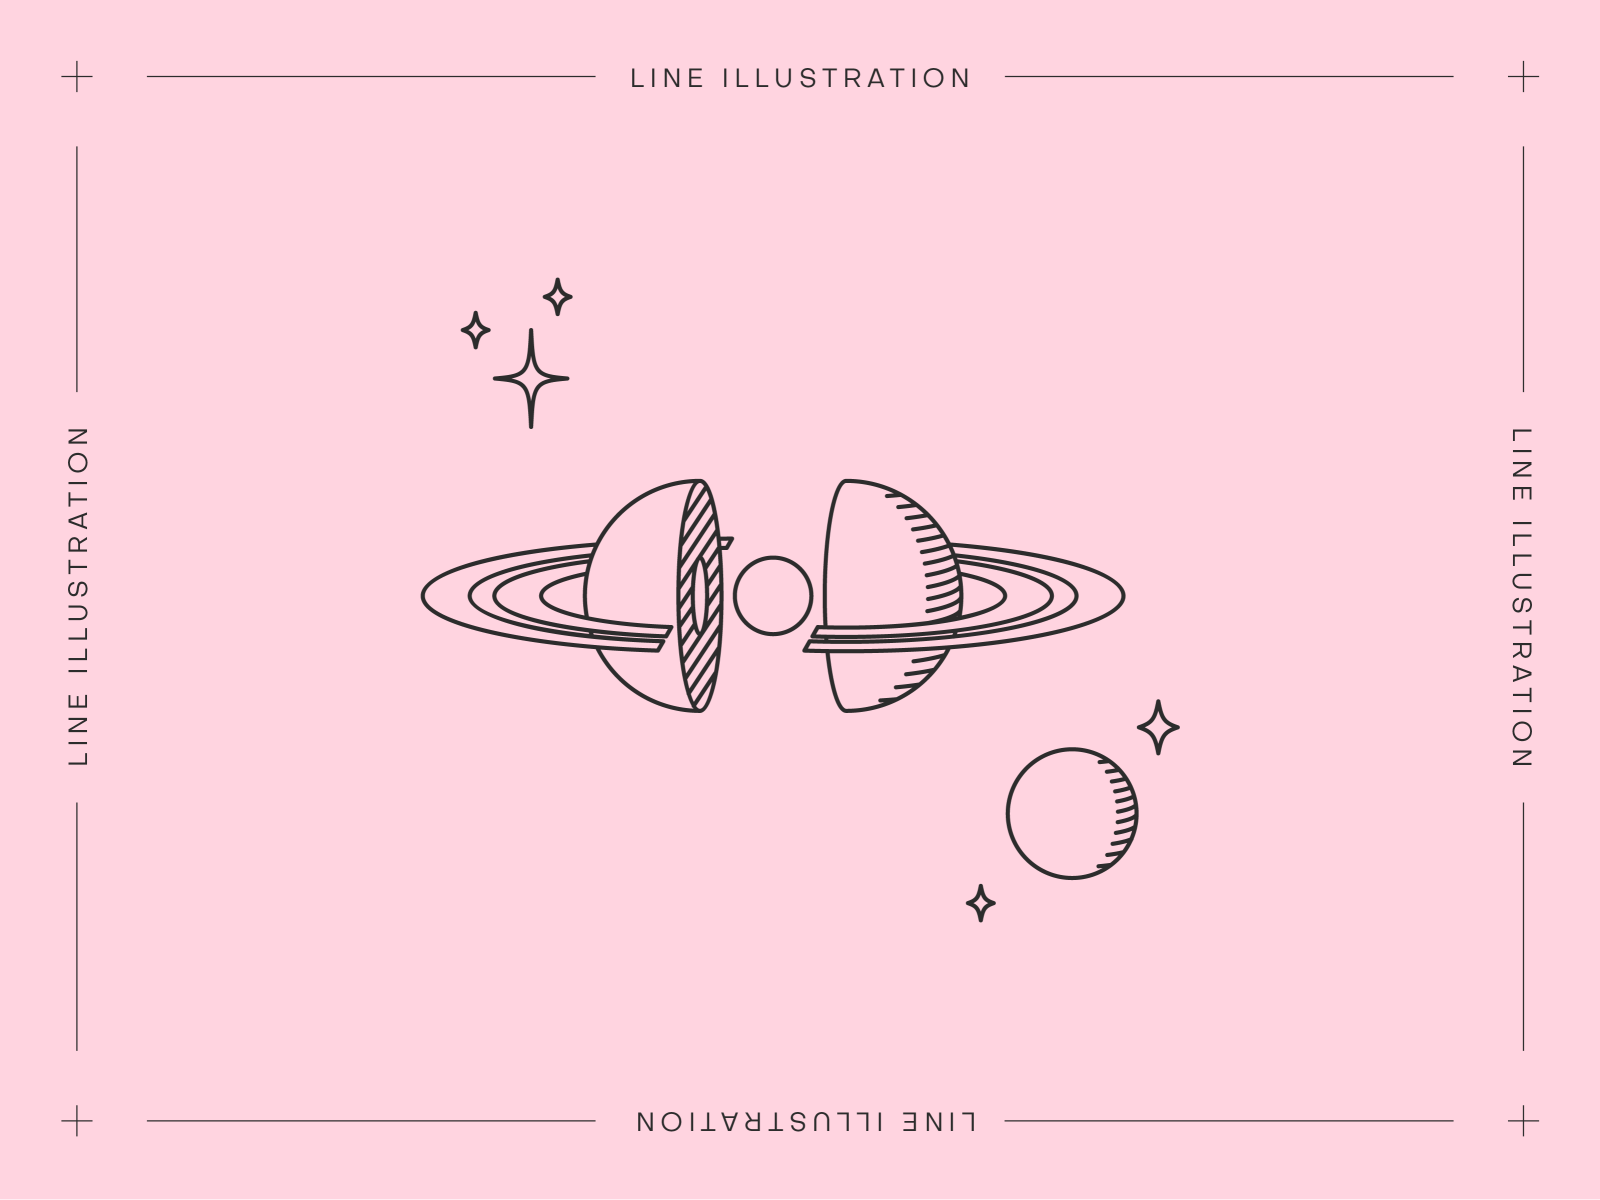 Monstera Box #06: Saturn american traditional cosmo david bowie illustration line linework minimal old american planets saturn space tattoo